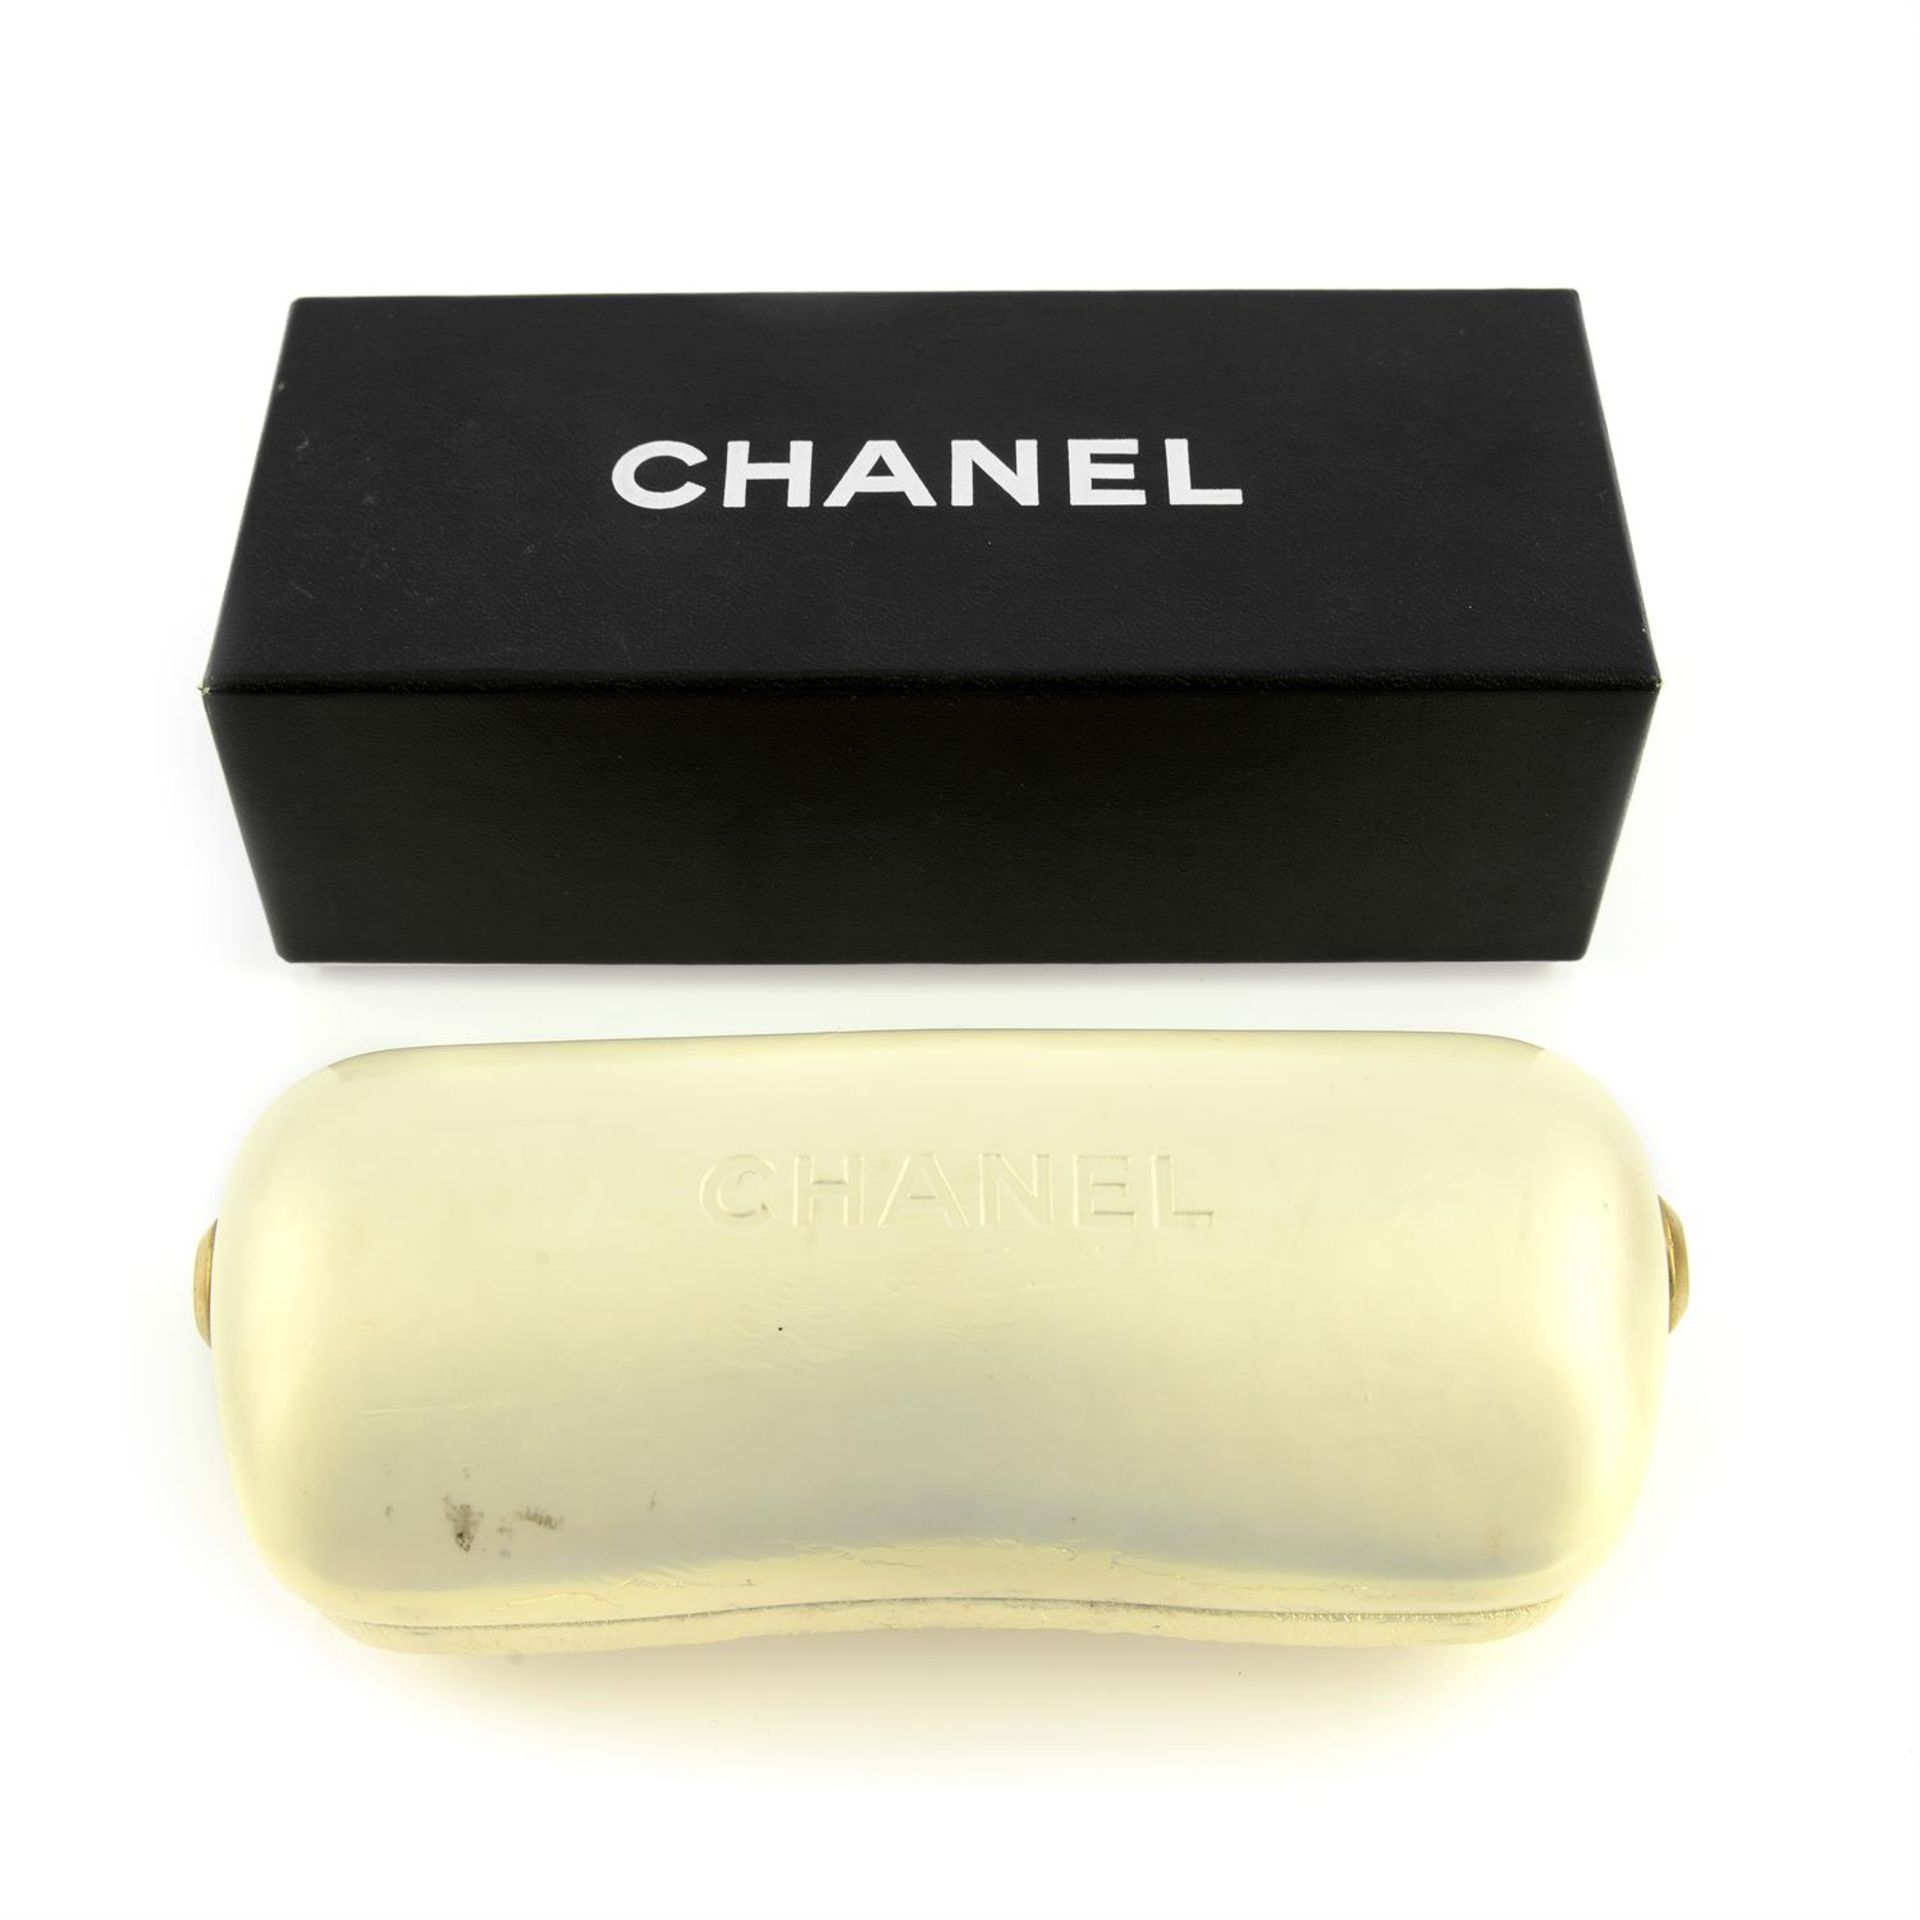 CHANEL- a pair of sunglasses. - Image 3 of 3